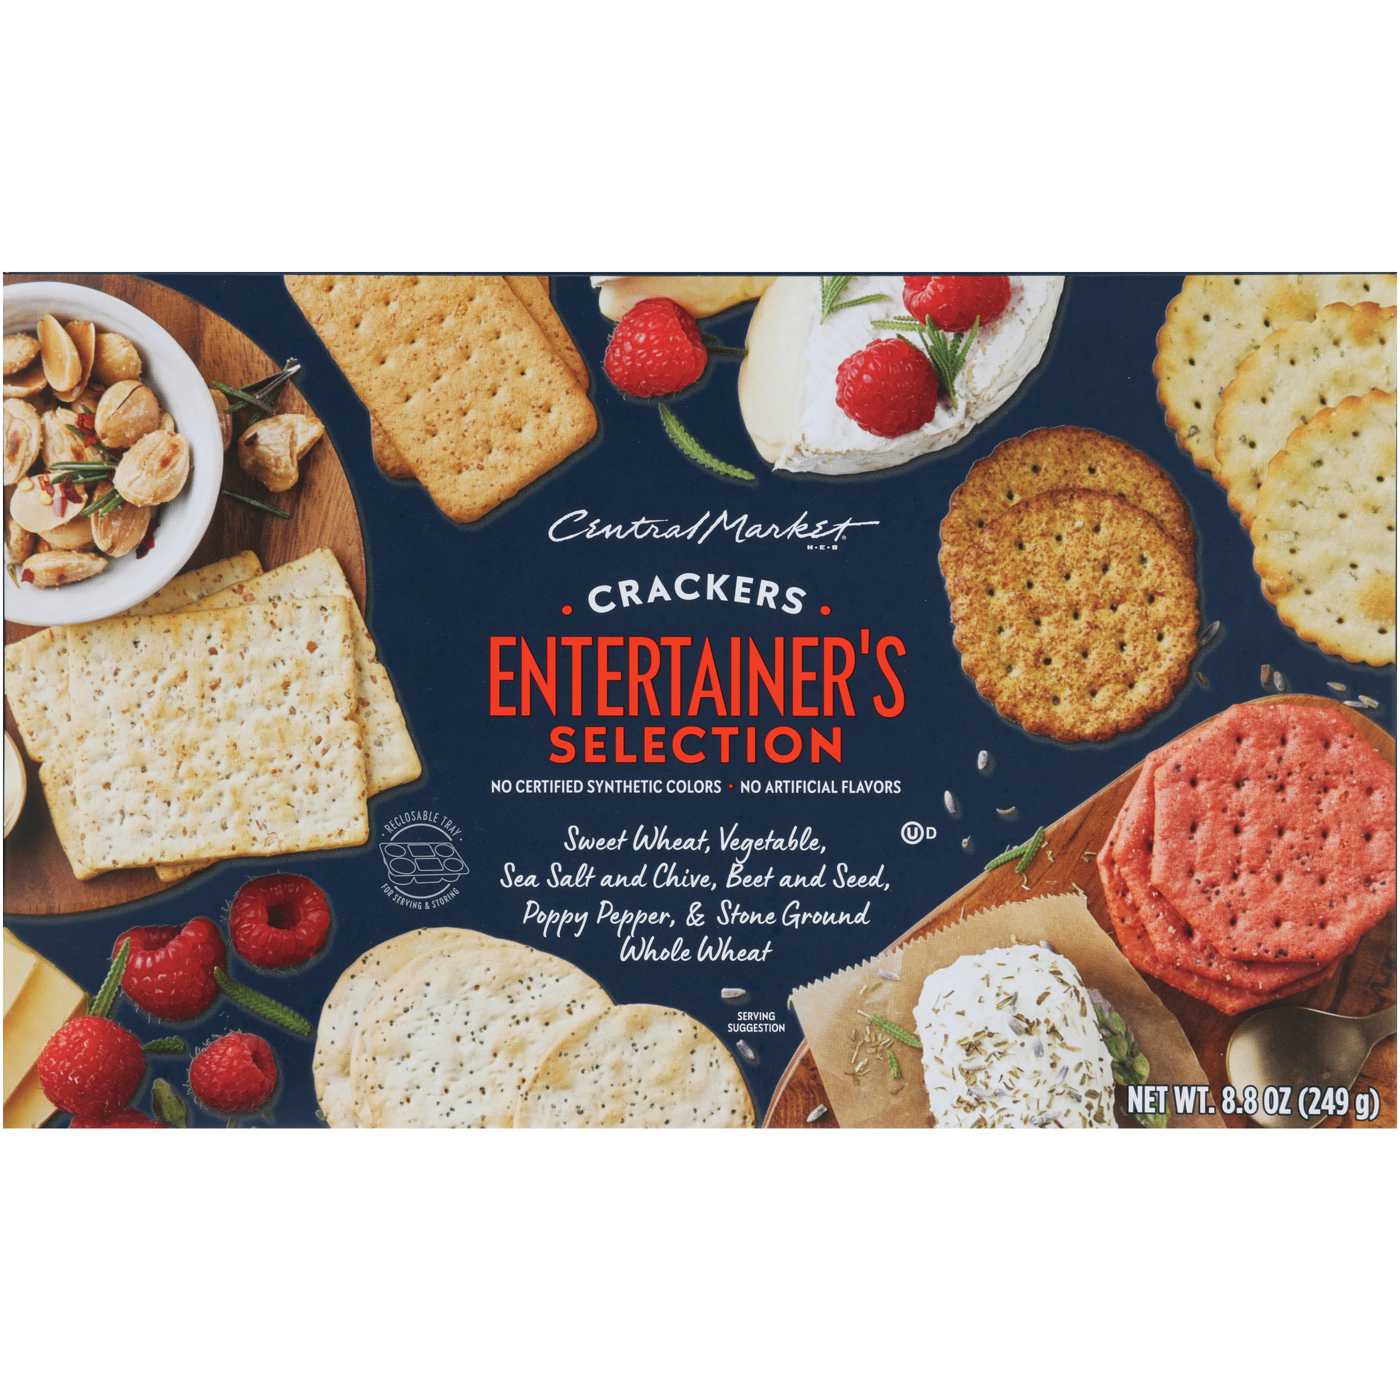 Central Market Entertainer's Selection Crackers; image 2 of 2